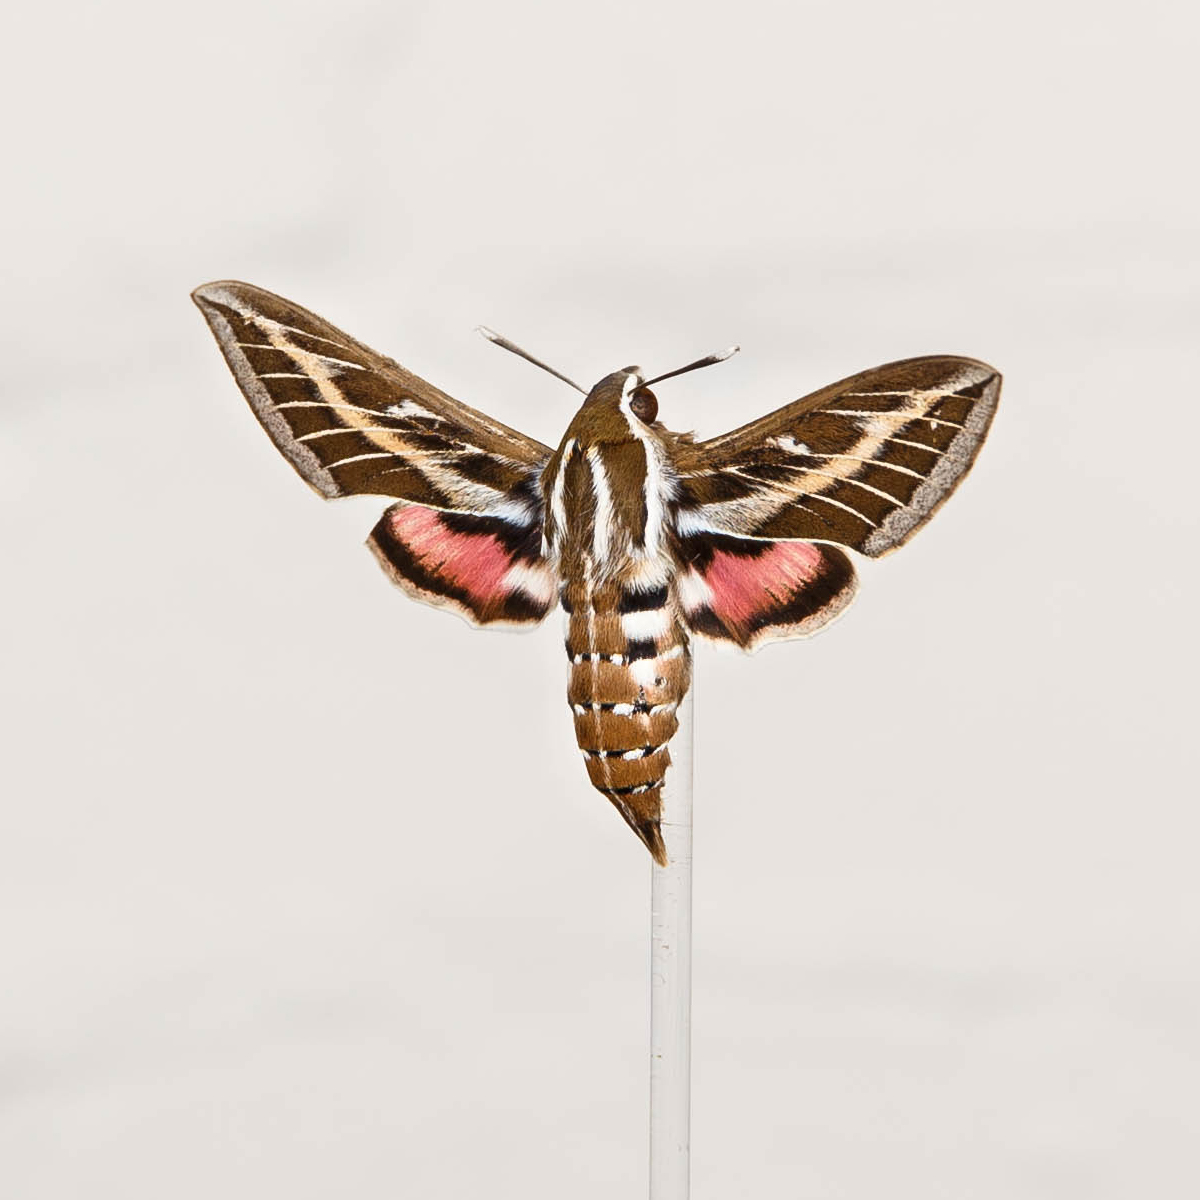 Striped Hawk-Moth in Glass Dome with Wooden Base (Hyles livornica)